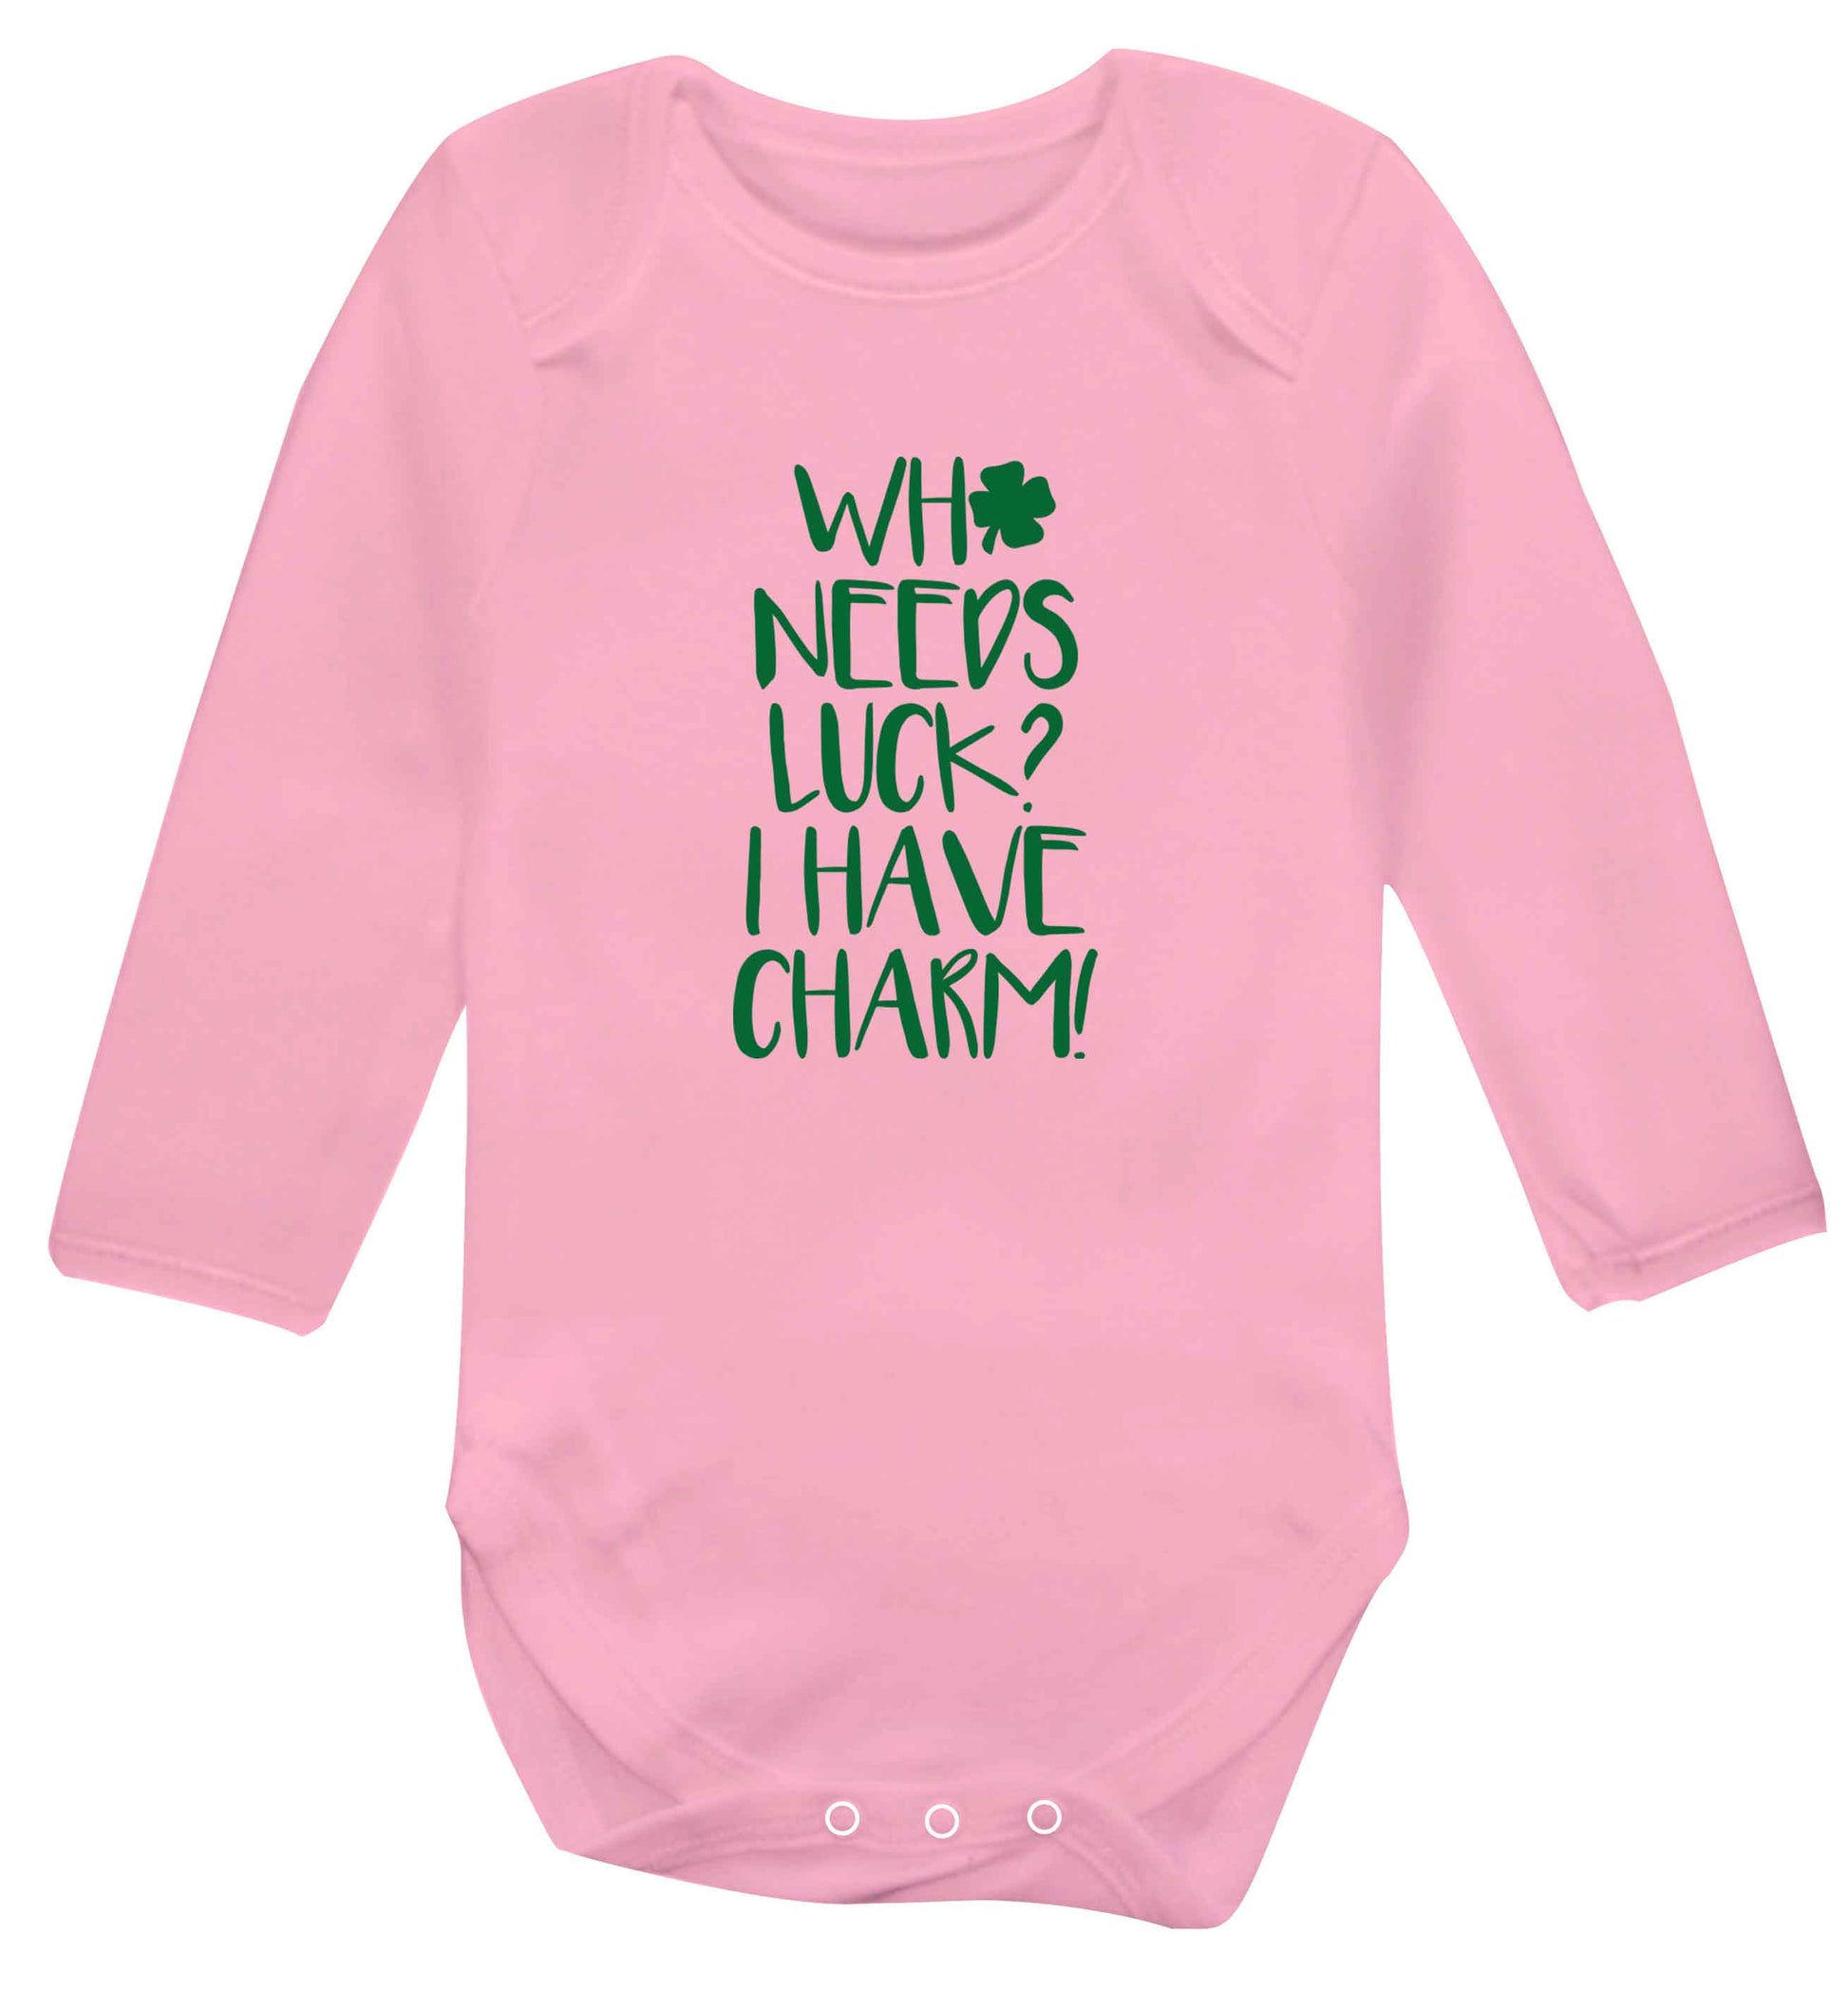 Who needs luck? I have charm! baby vest long sleeved pale pink 6-12 months